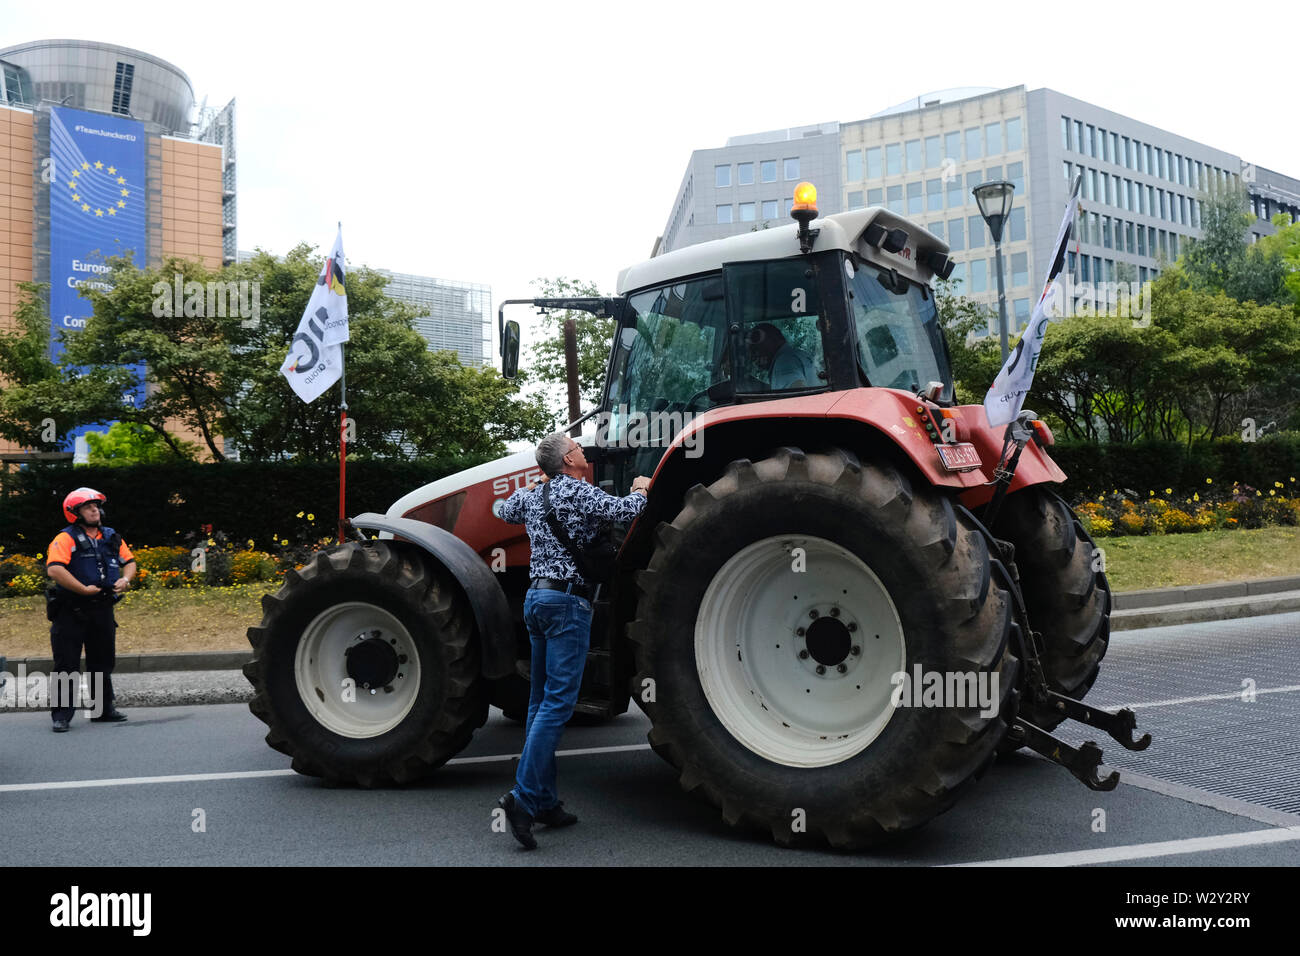 Brussels, Belgium. 11th July 2019. Tractors are seen outside of EU Commission Headquarters as farmers  take part in a protest against the EU's Mercosur trade deal. Credit: ALEXANDROS MICHAILIDIS/Alamy Live News Stock Photo